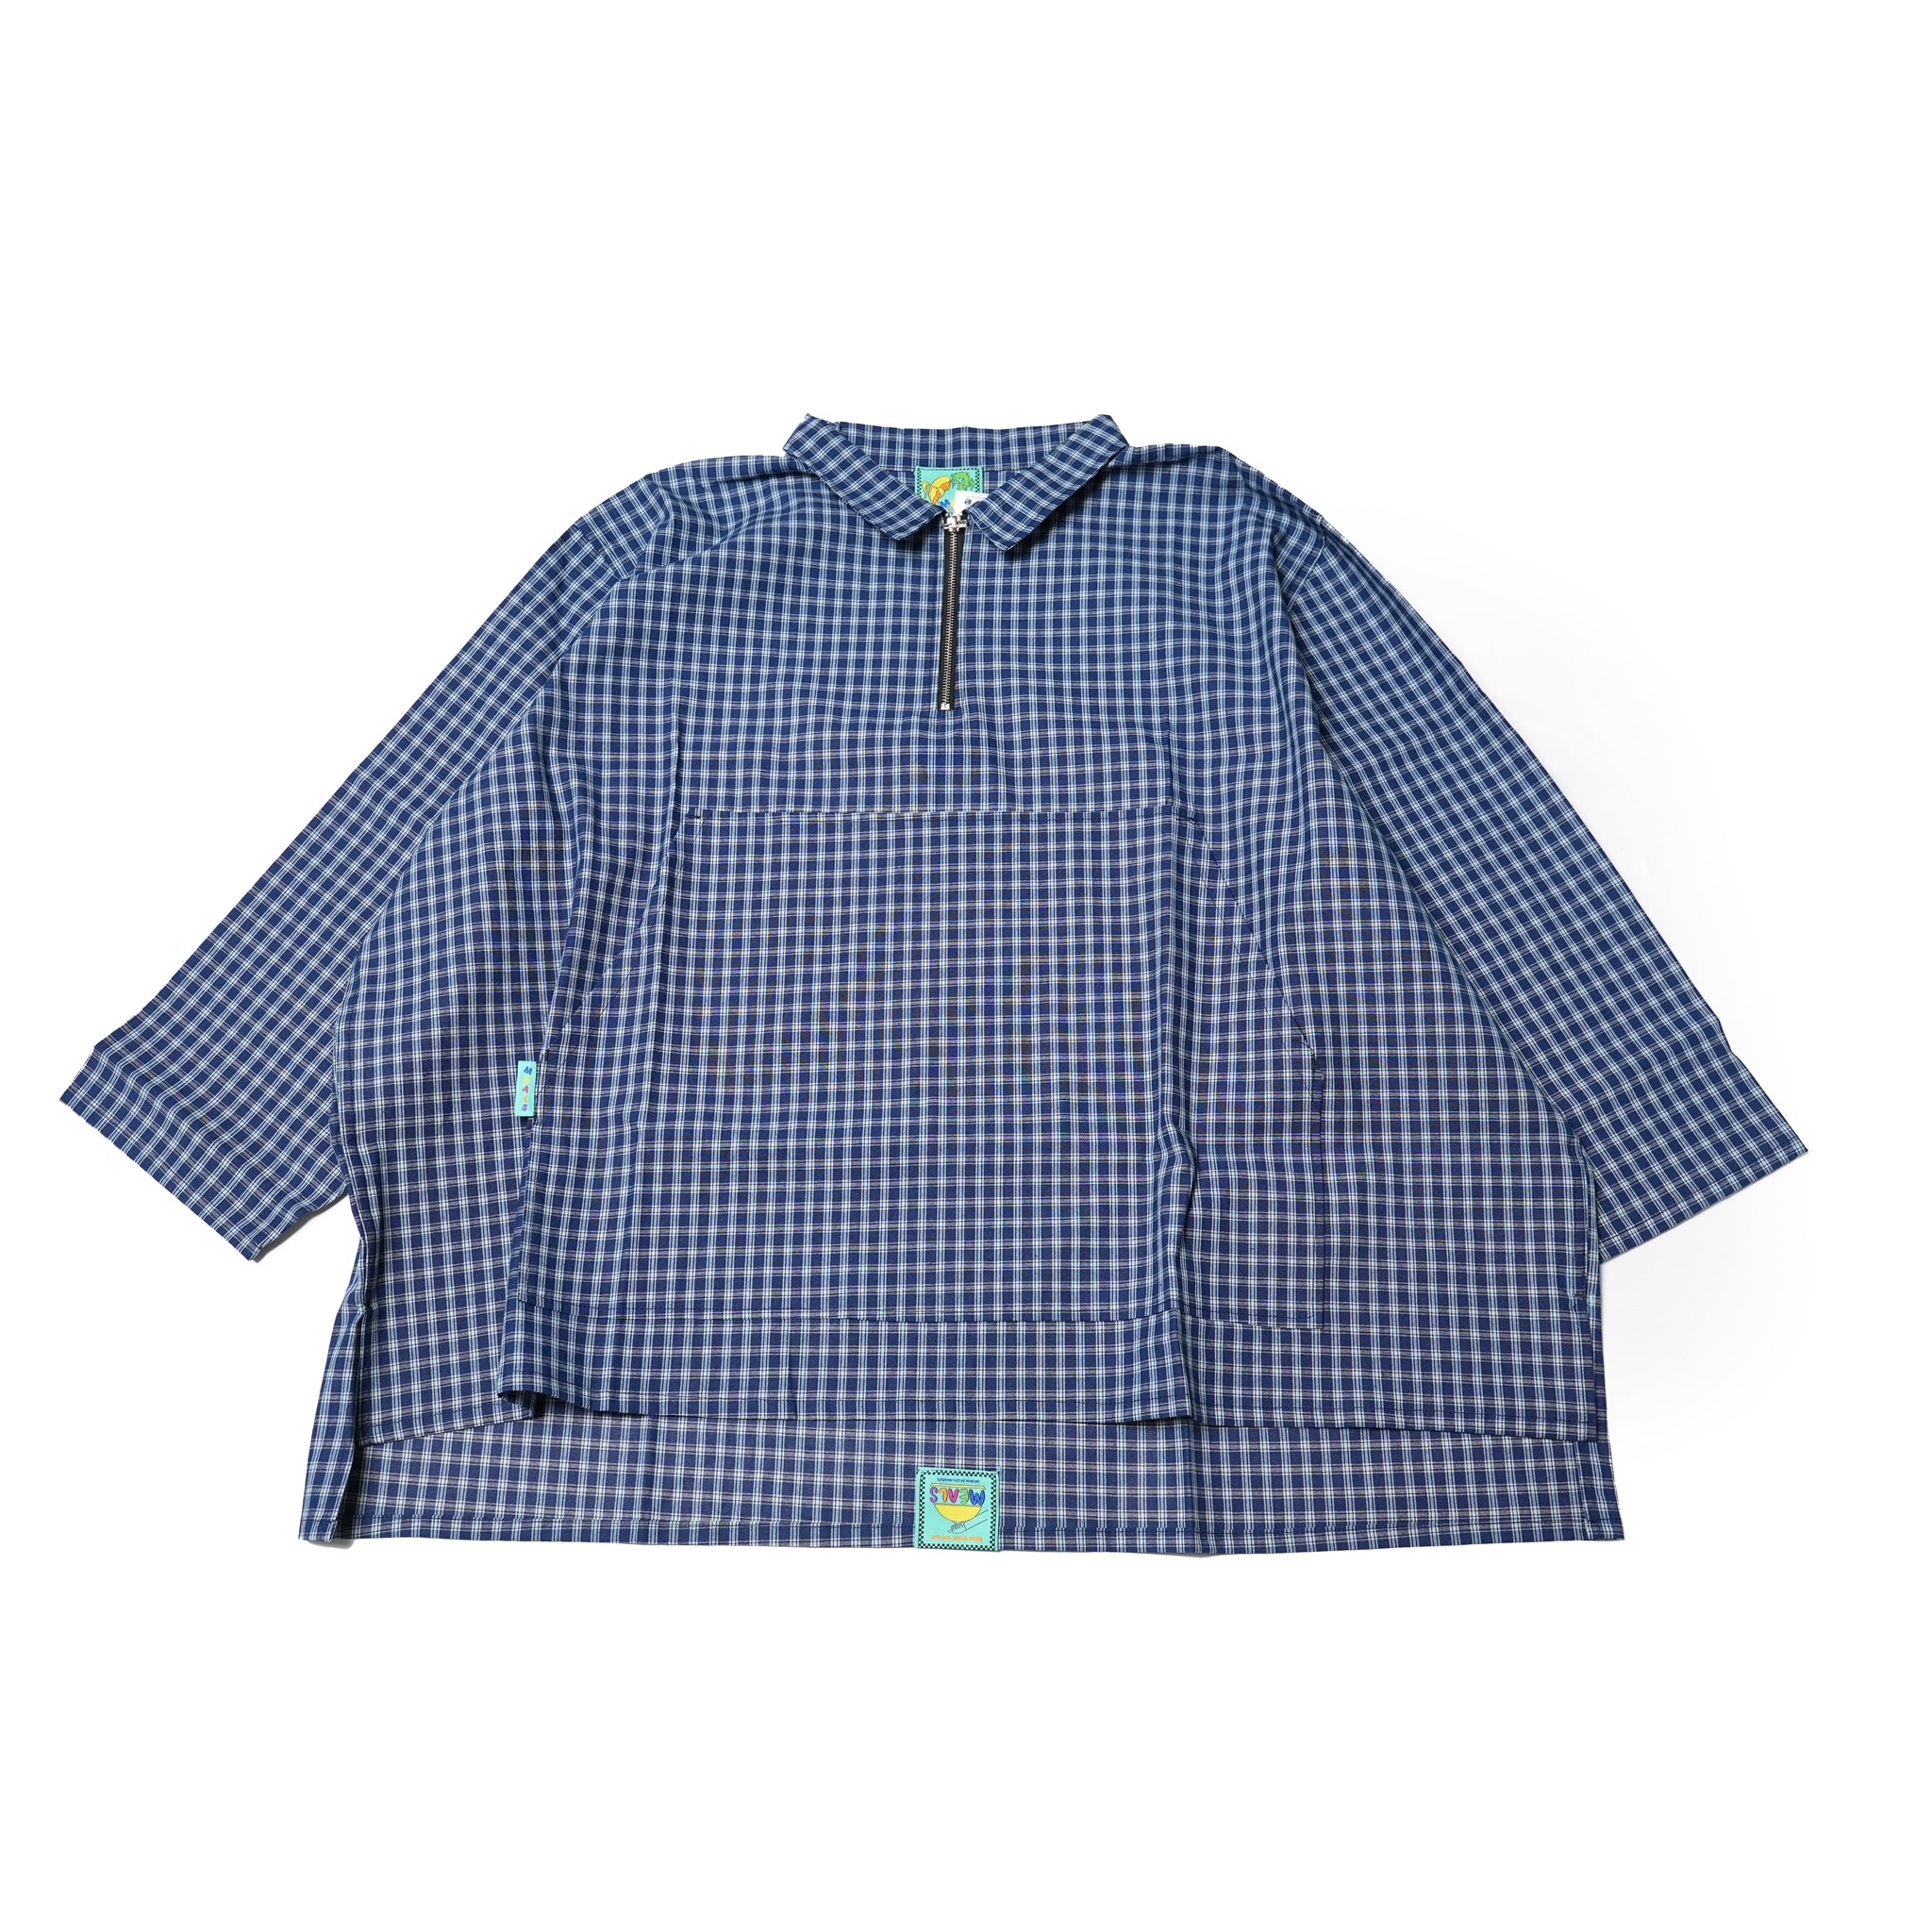 No:me-03 | Name:ZIP PULLOVER | Color:Picnic Plaid【MEALS CLOTHING_ミールクロージング】